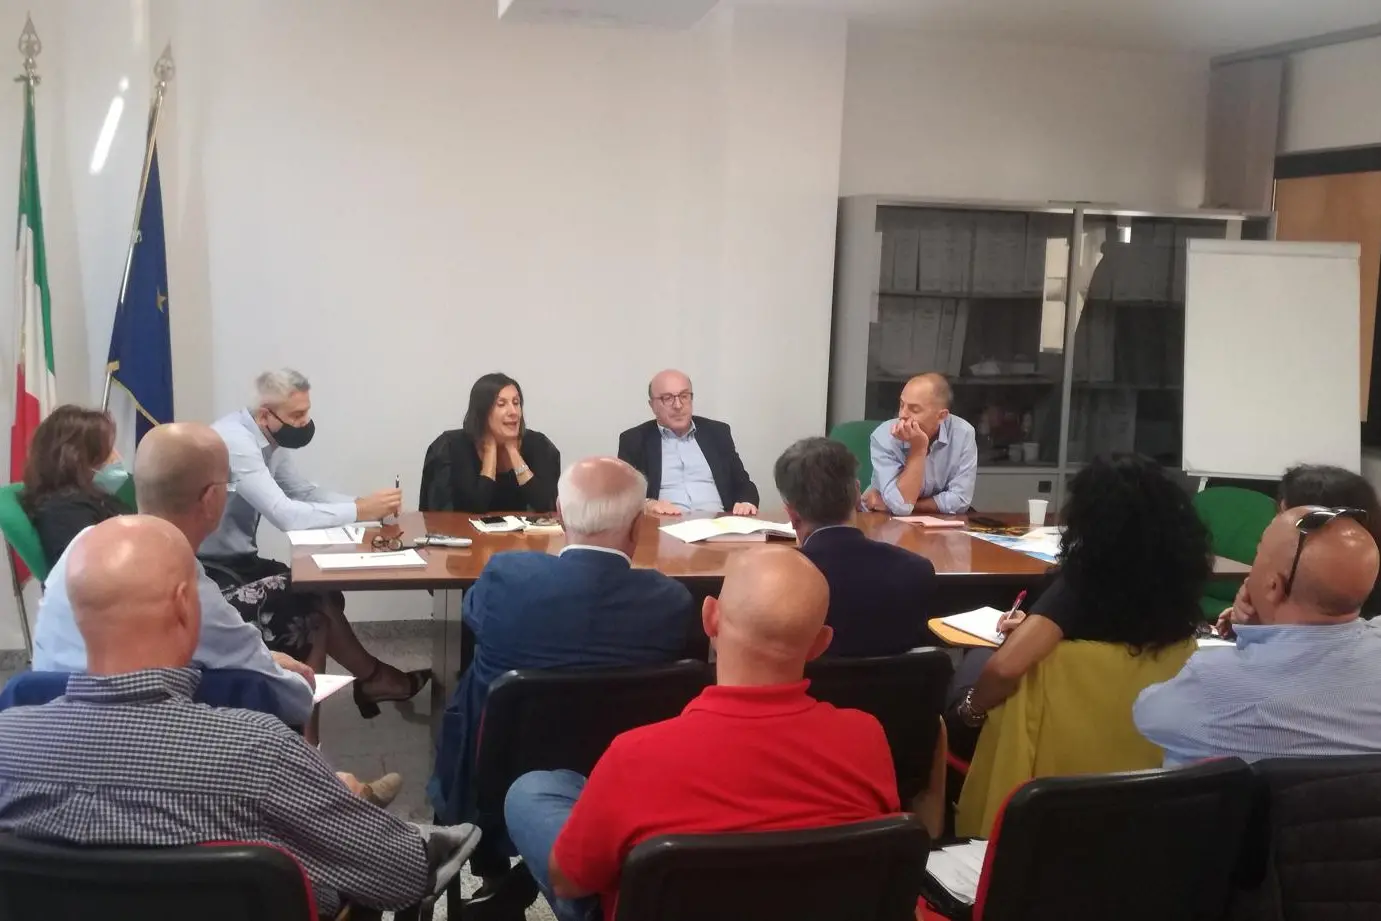 The meeting between Nieddu and the trade unions (Photo Press Office of the Sardinia Region)